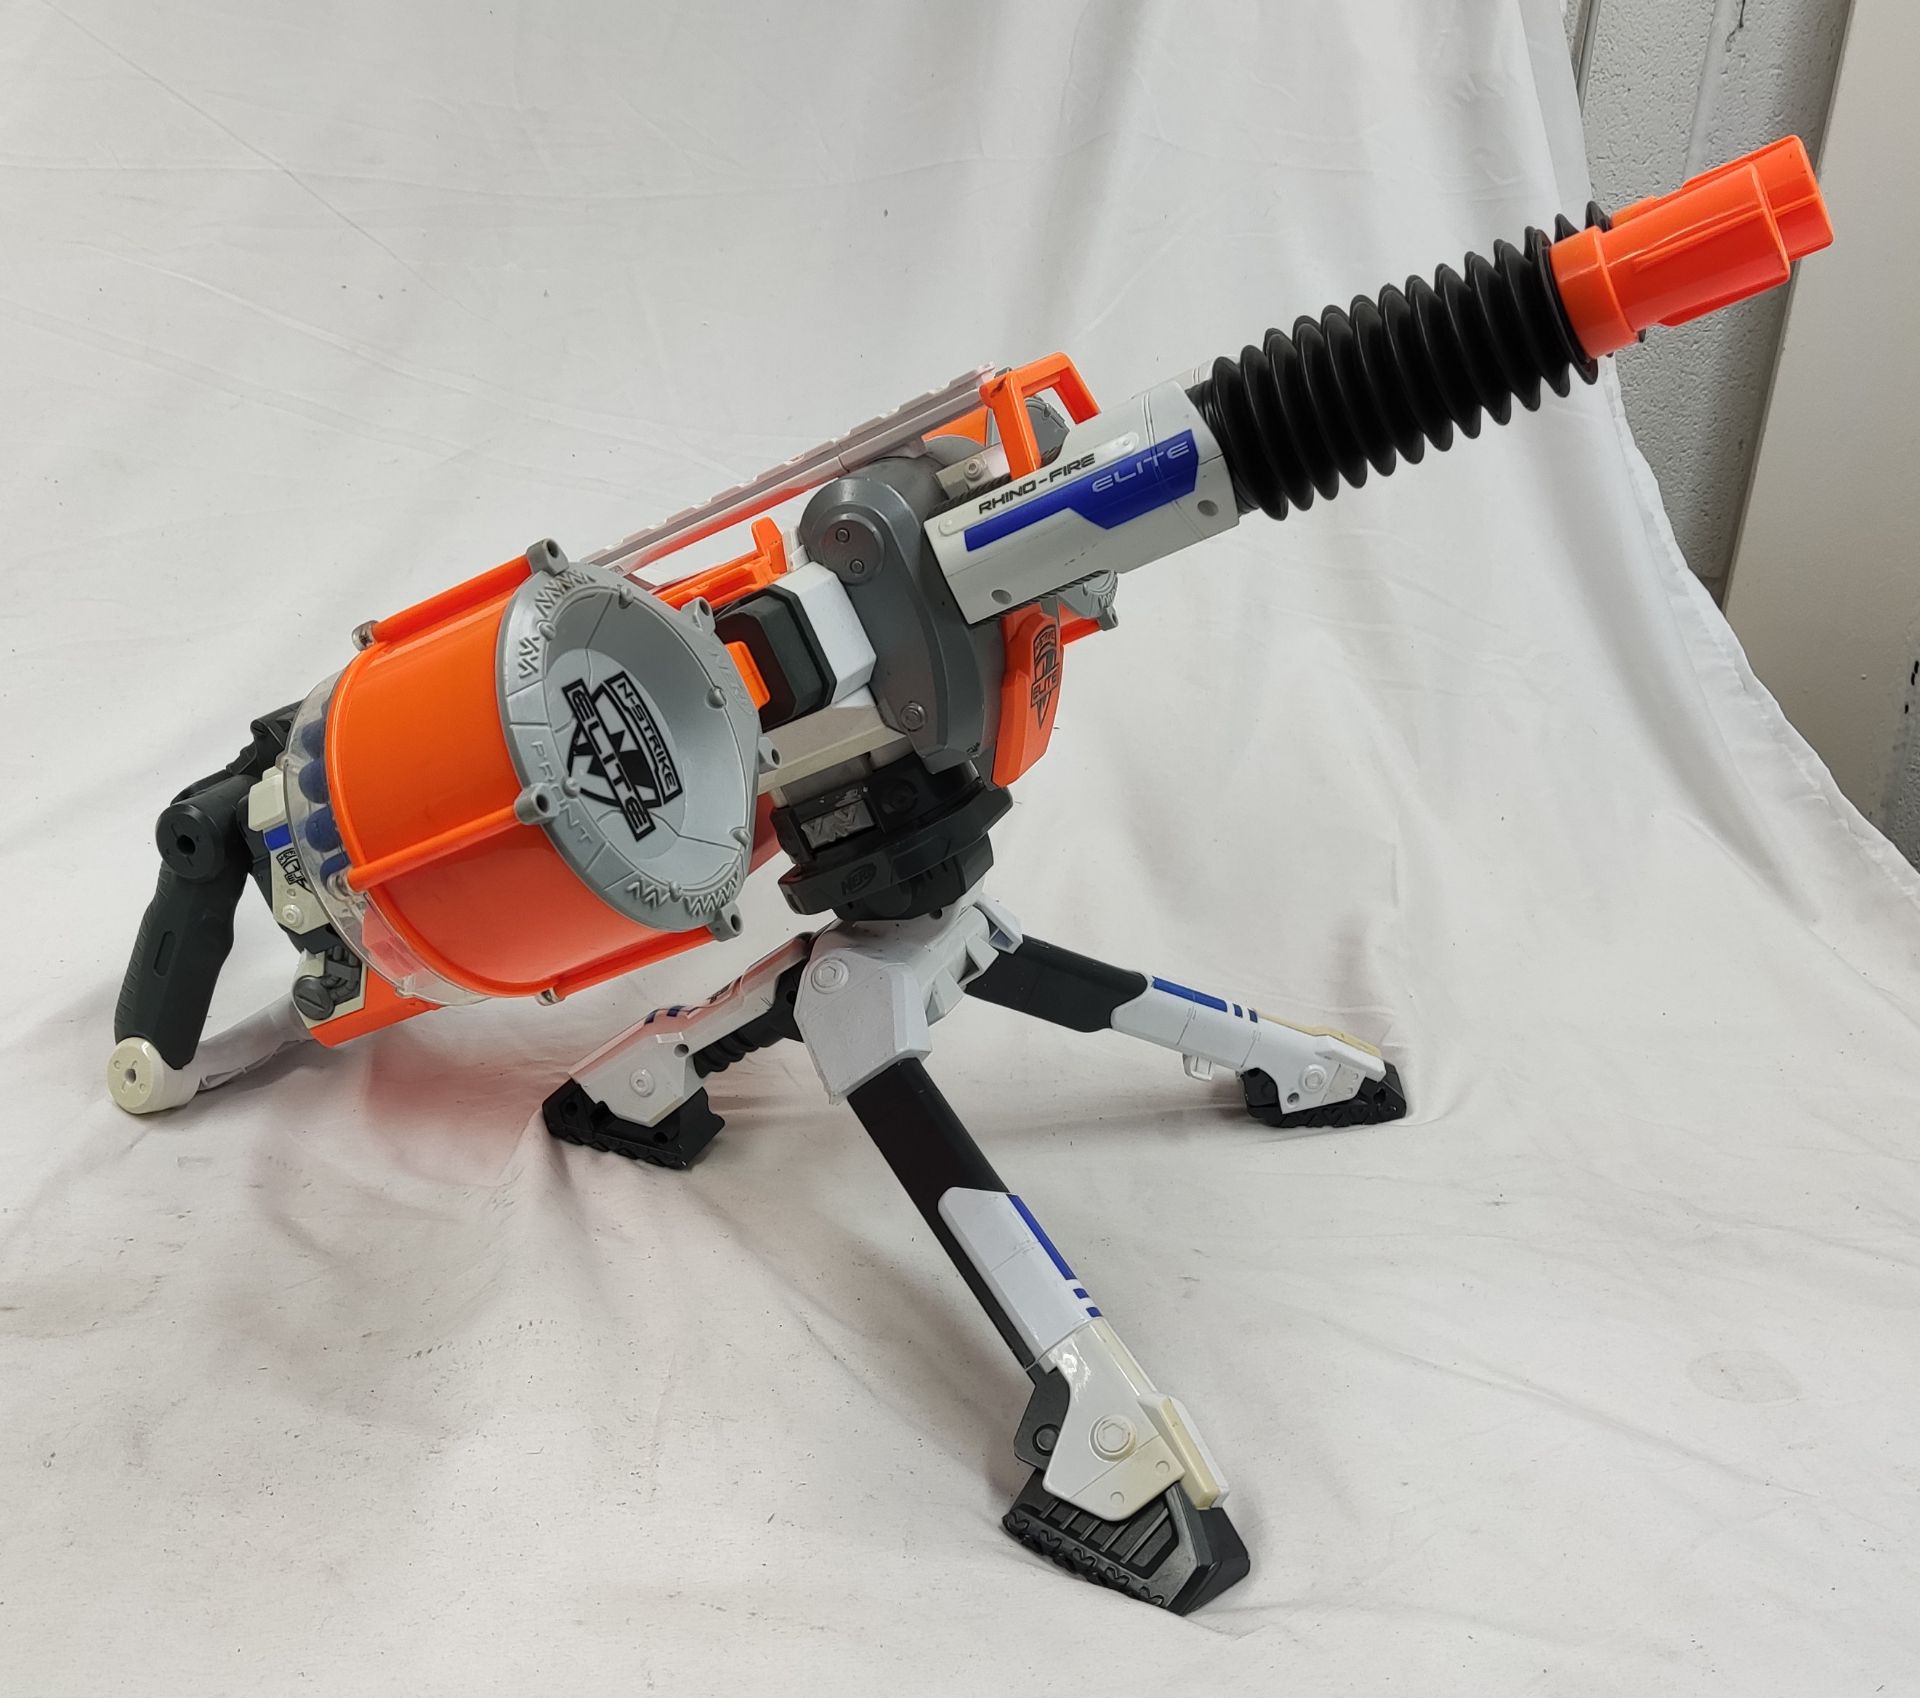 1 x Nerf Rhino-Fire Electric Nerf Gun with Moving Barrels - Used - CL444 - NO VAT ON THE HAMMER -